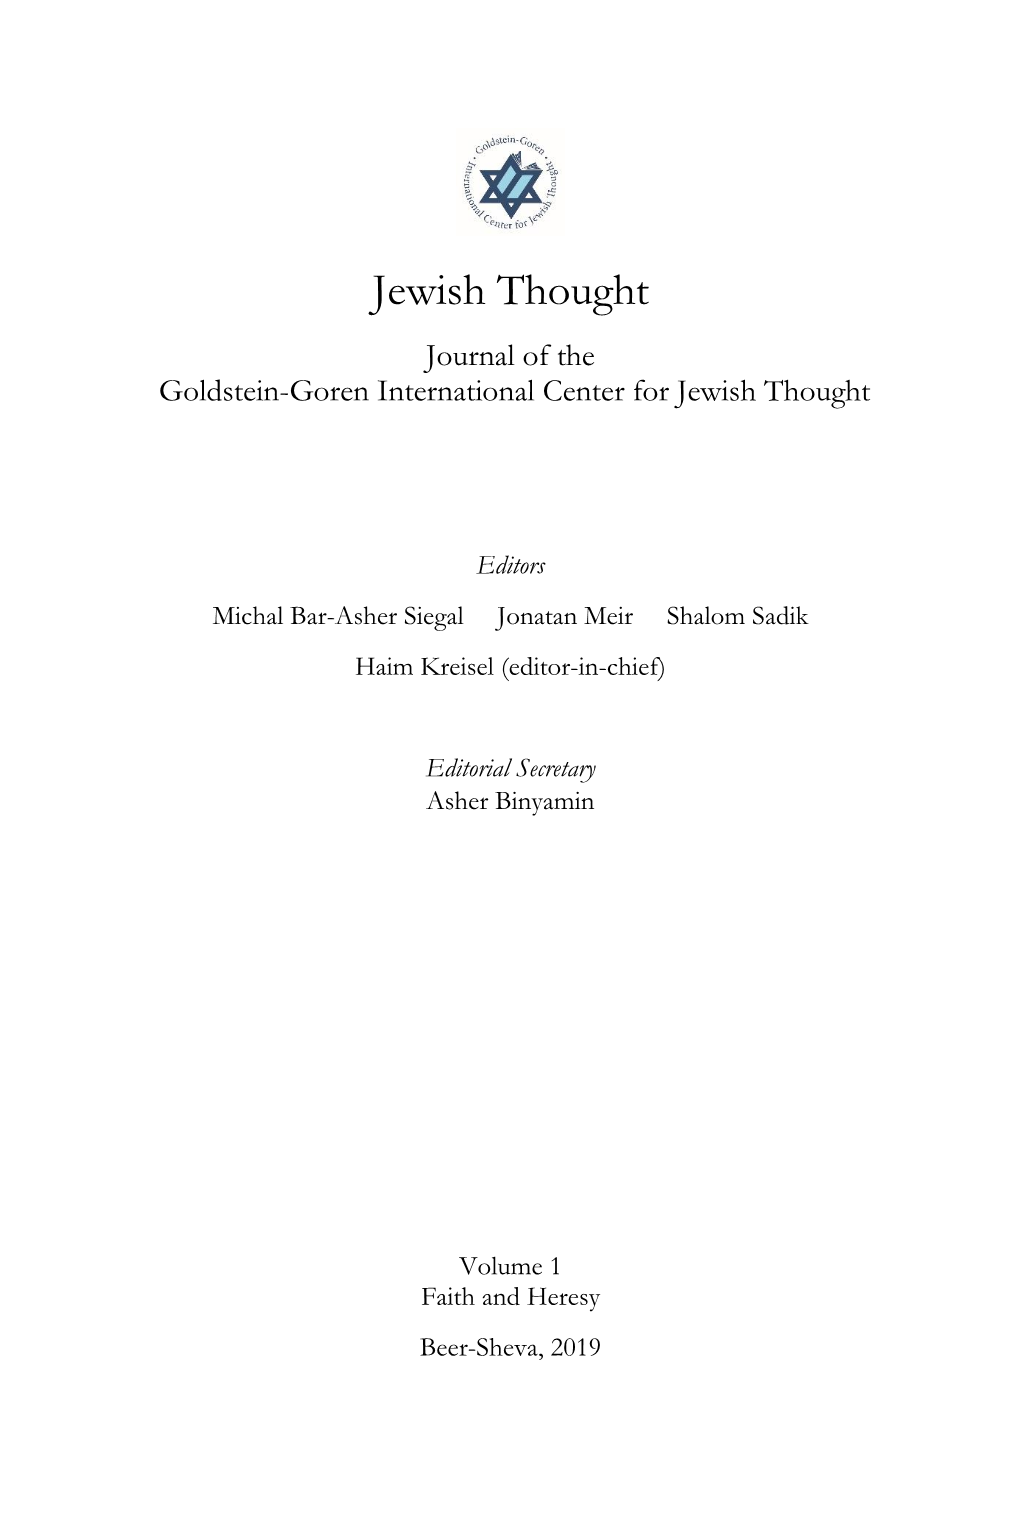 Jewish Thought Journal of the Goldstein-Goren International Center for Jewish Thought